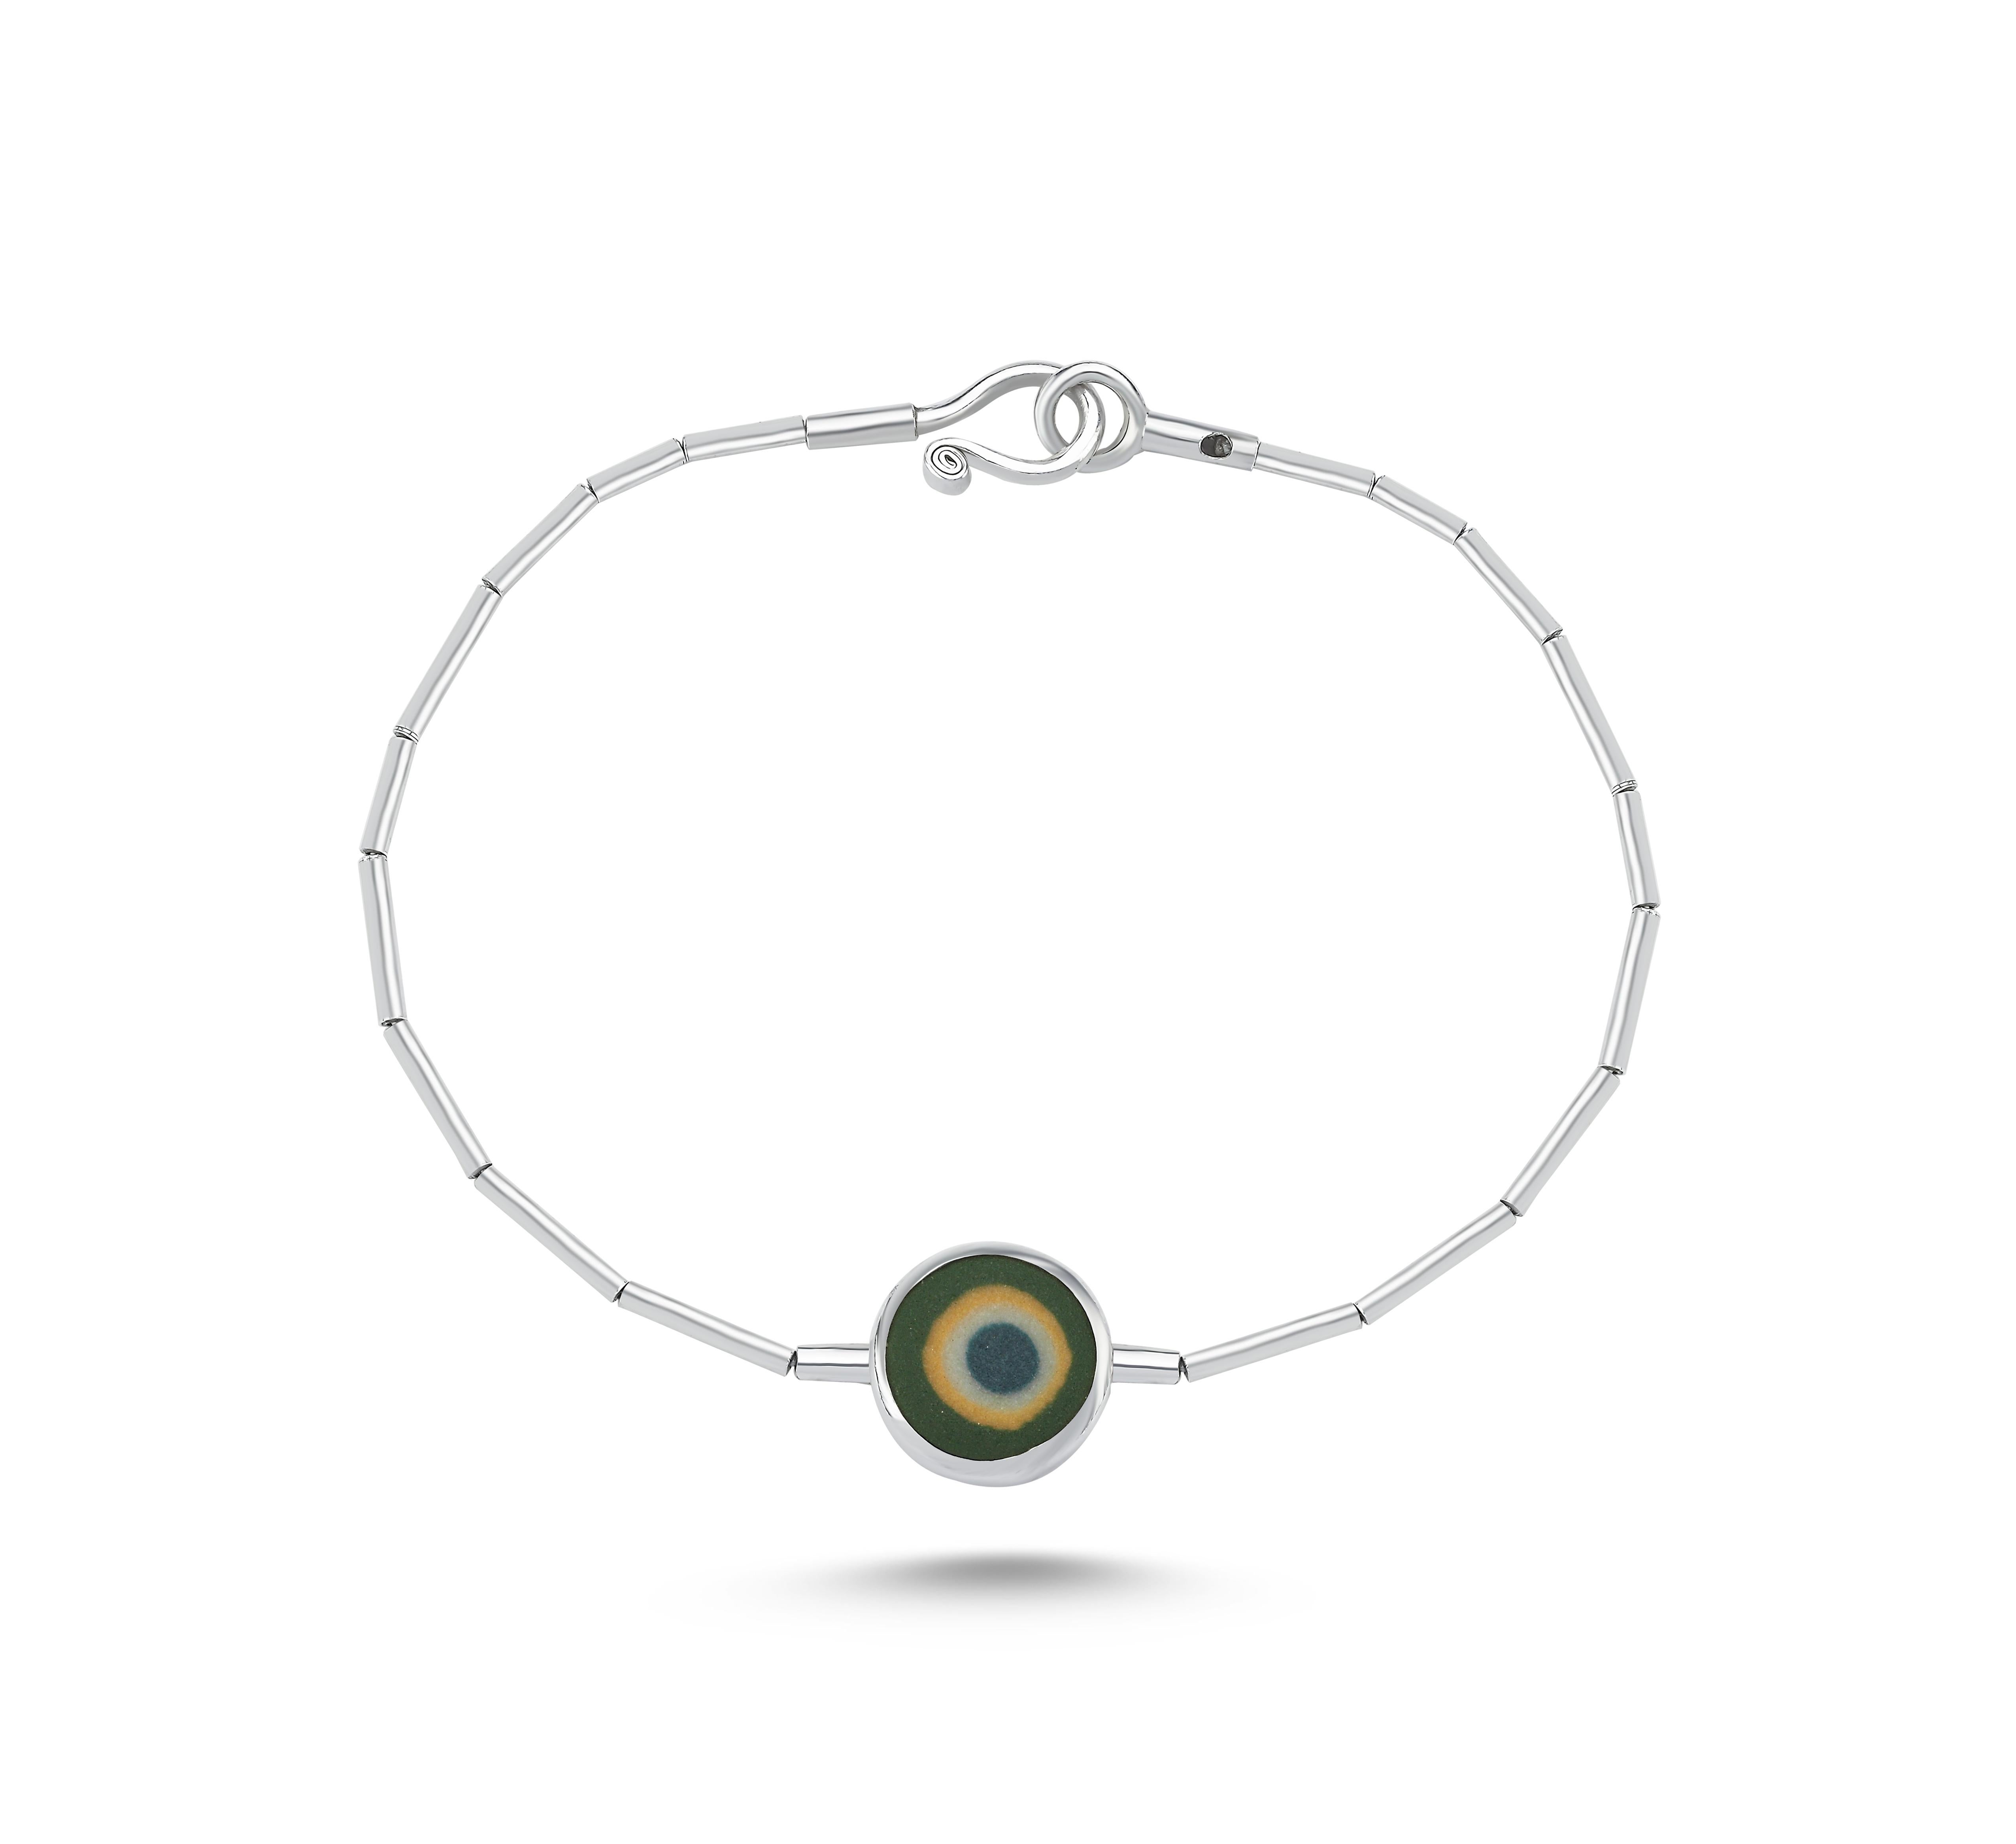 Evil Eye Bead made from porcelain. Sterling Silver. You can choose this design as a bracelet or necklace. Feel free to contact us.
Other color options are blue, green, orange, turquoise. We also have different shapes. Do not hesisate to ask your